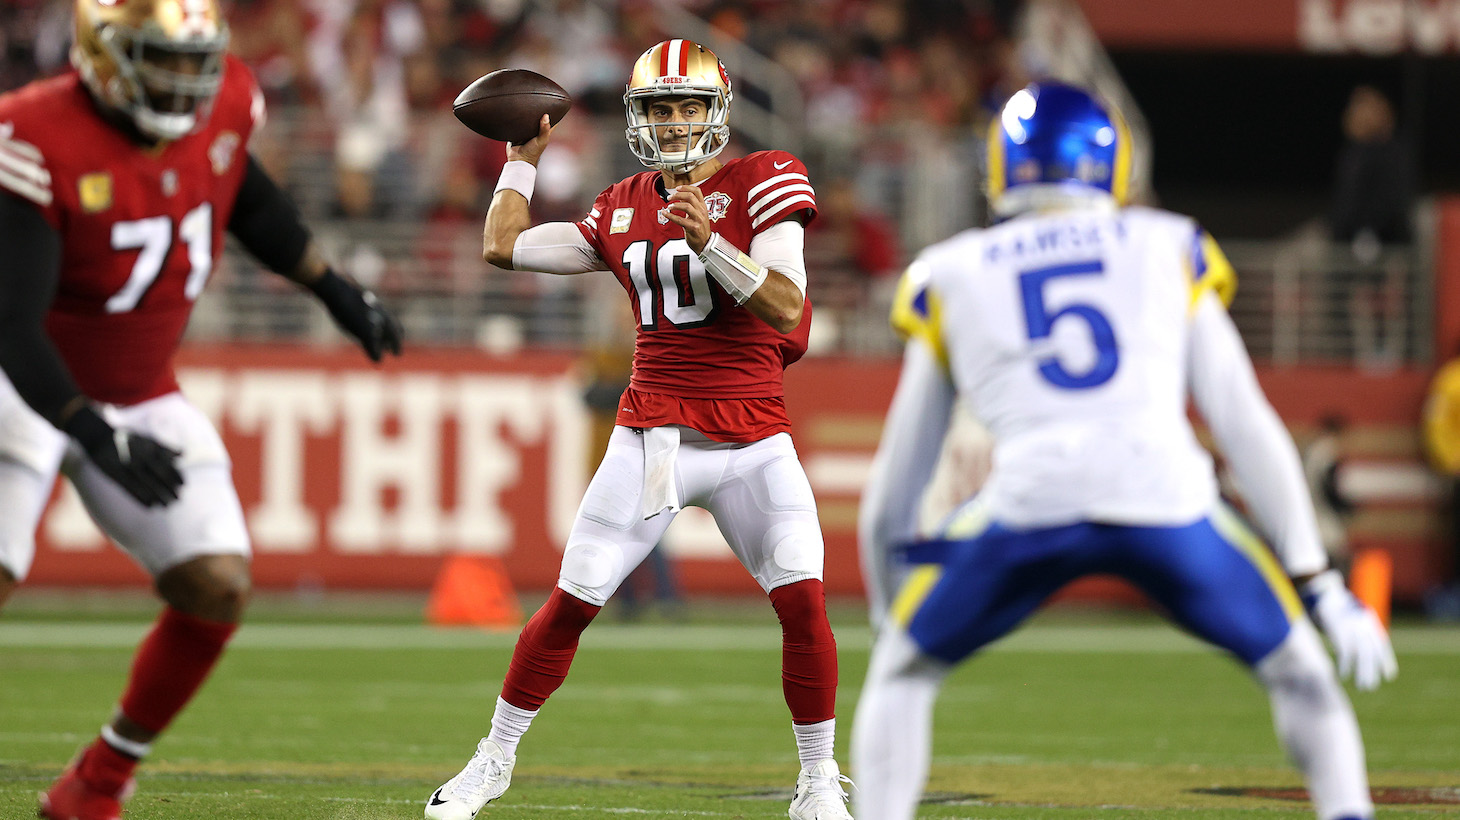 SANTA CLARA, CALIFORNIA - NOVEMBER 15: Jimmy Garoppolo #10 of the San Francisco 49ers looks for an open teammate during the third quarter in the game against the Los Angeles Rams at Levi's Stadium on November 15, 2021 in Santa Clara, California. (Photo by Ezra Shaw/Getty Images)